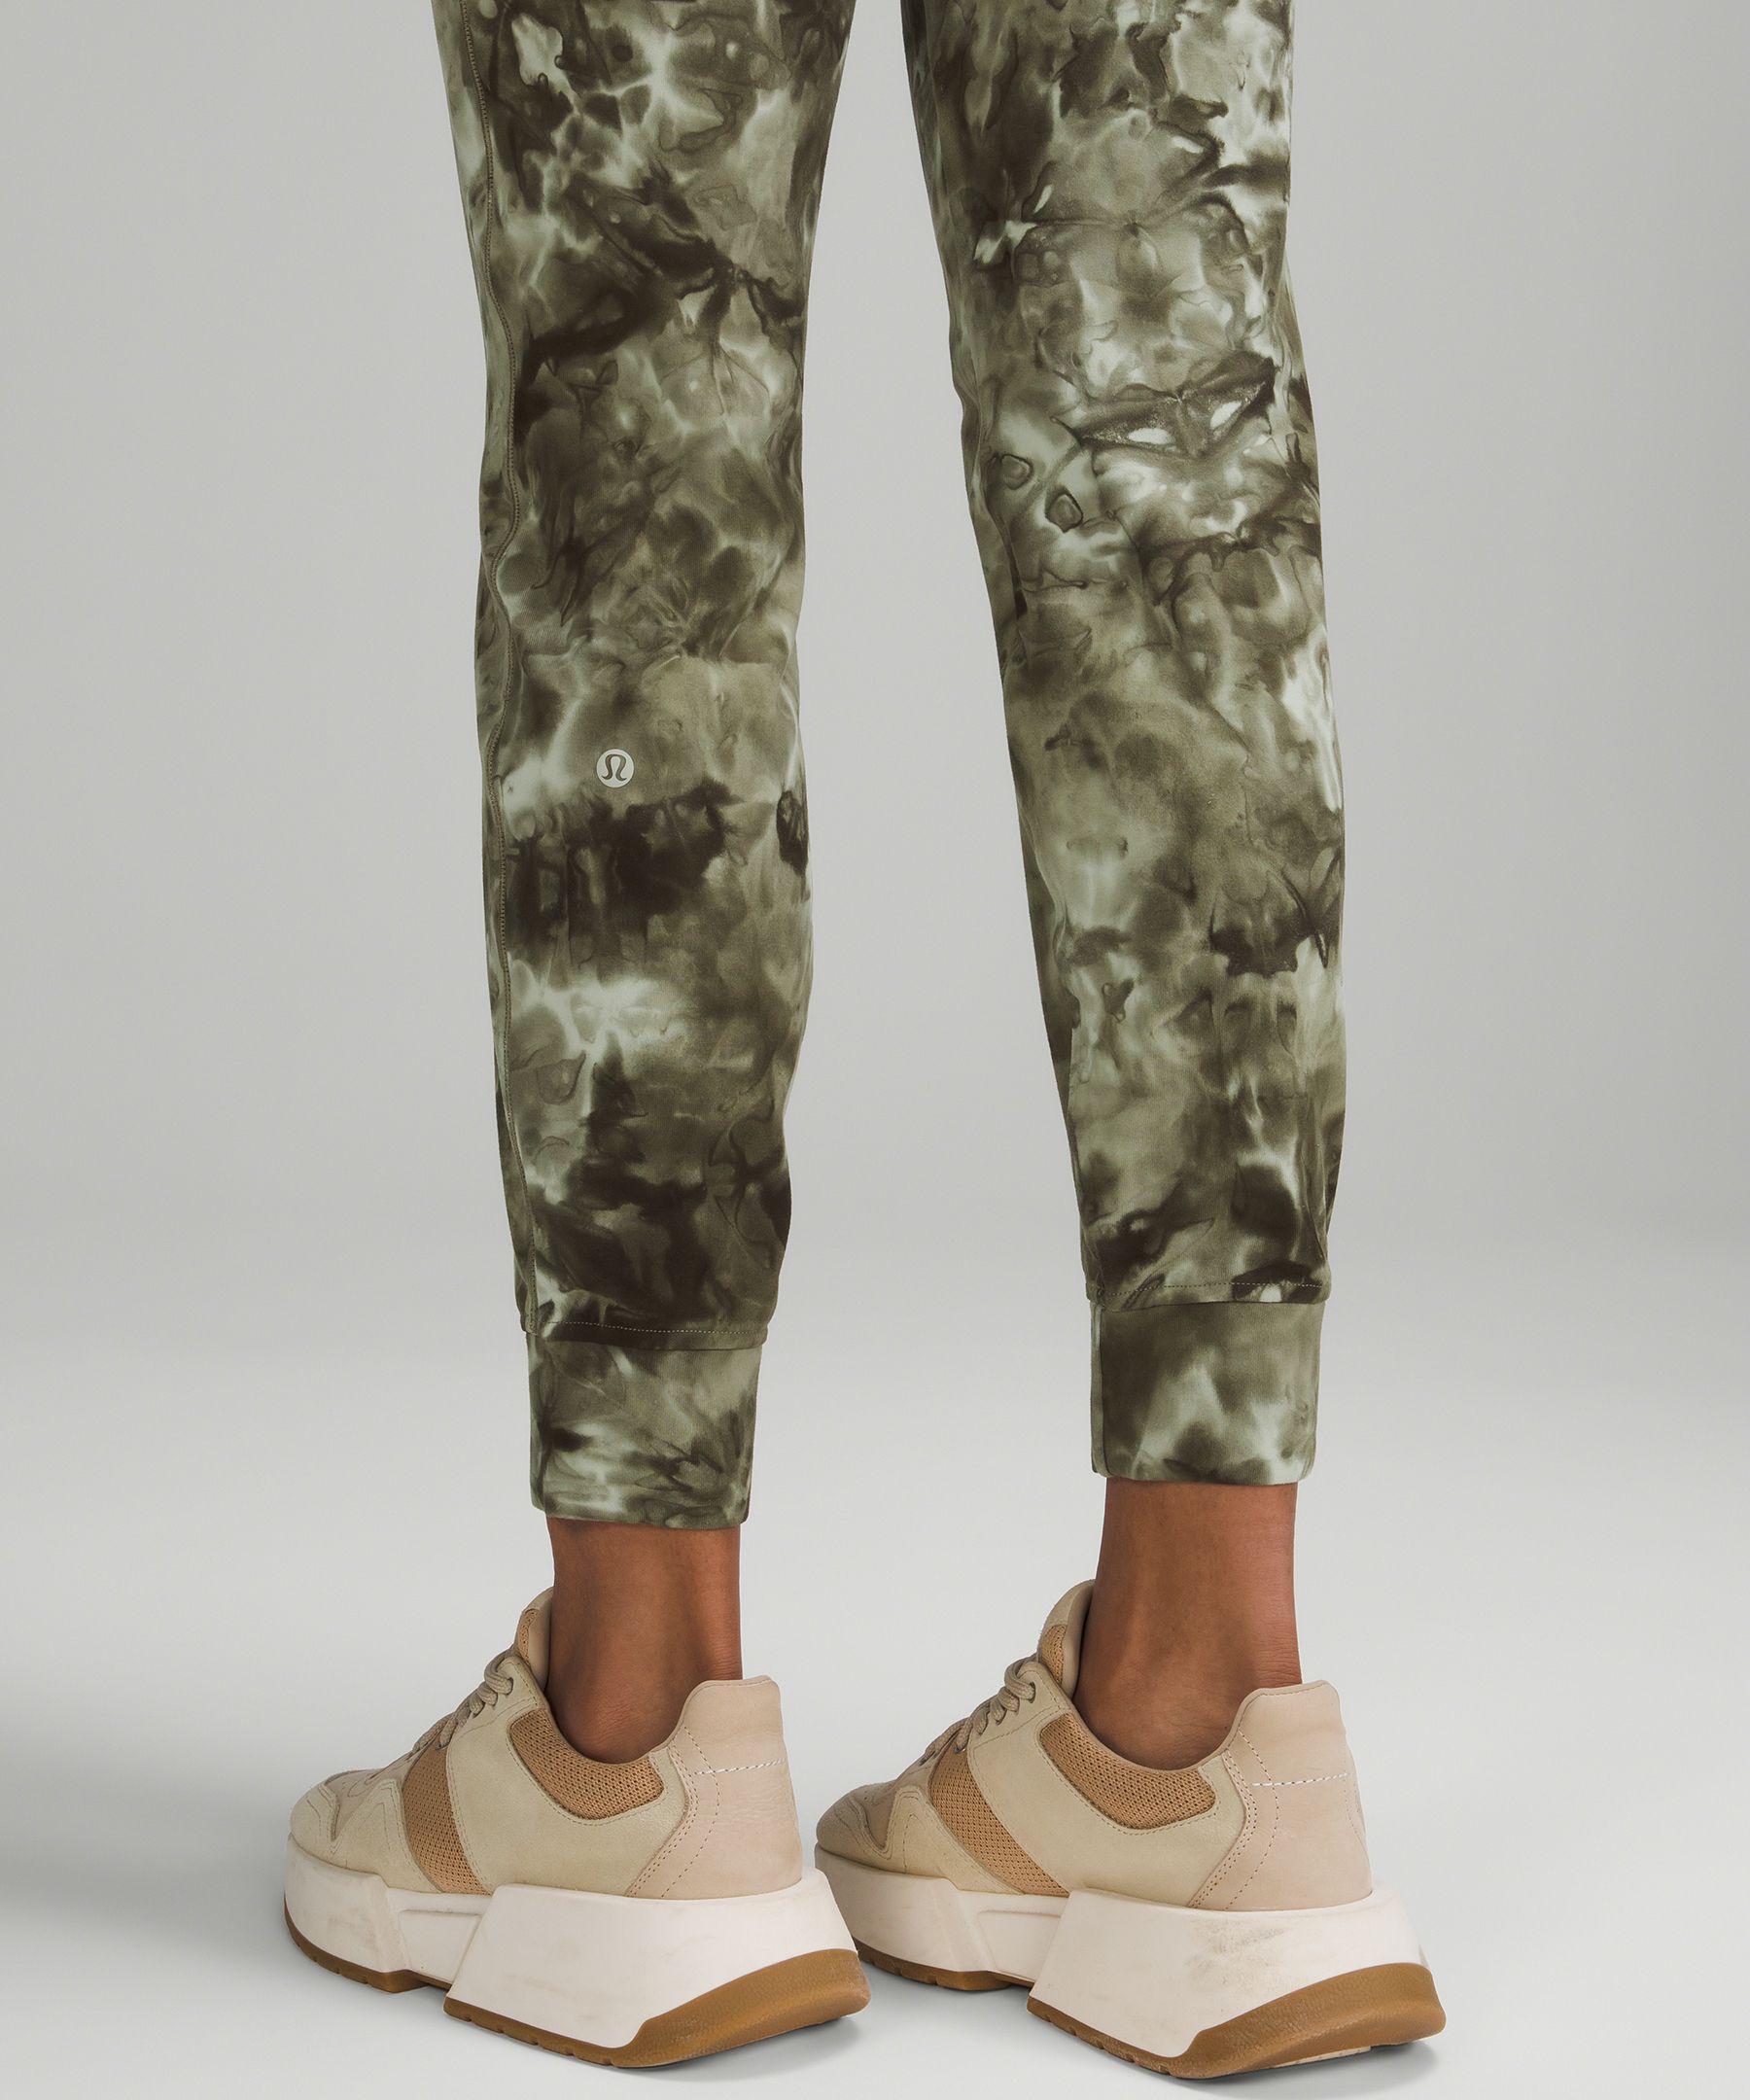 Today's outfit feat. The Ready To Rulu Joggers in incognito Camo